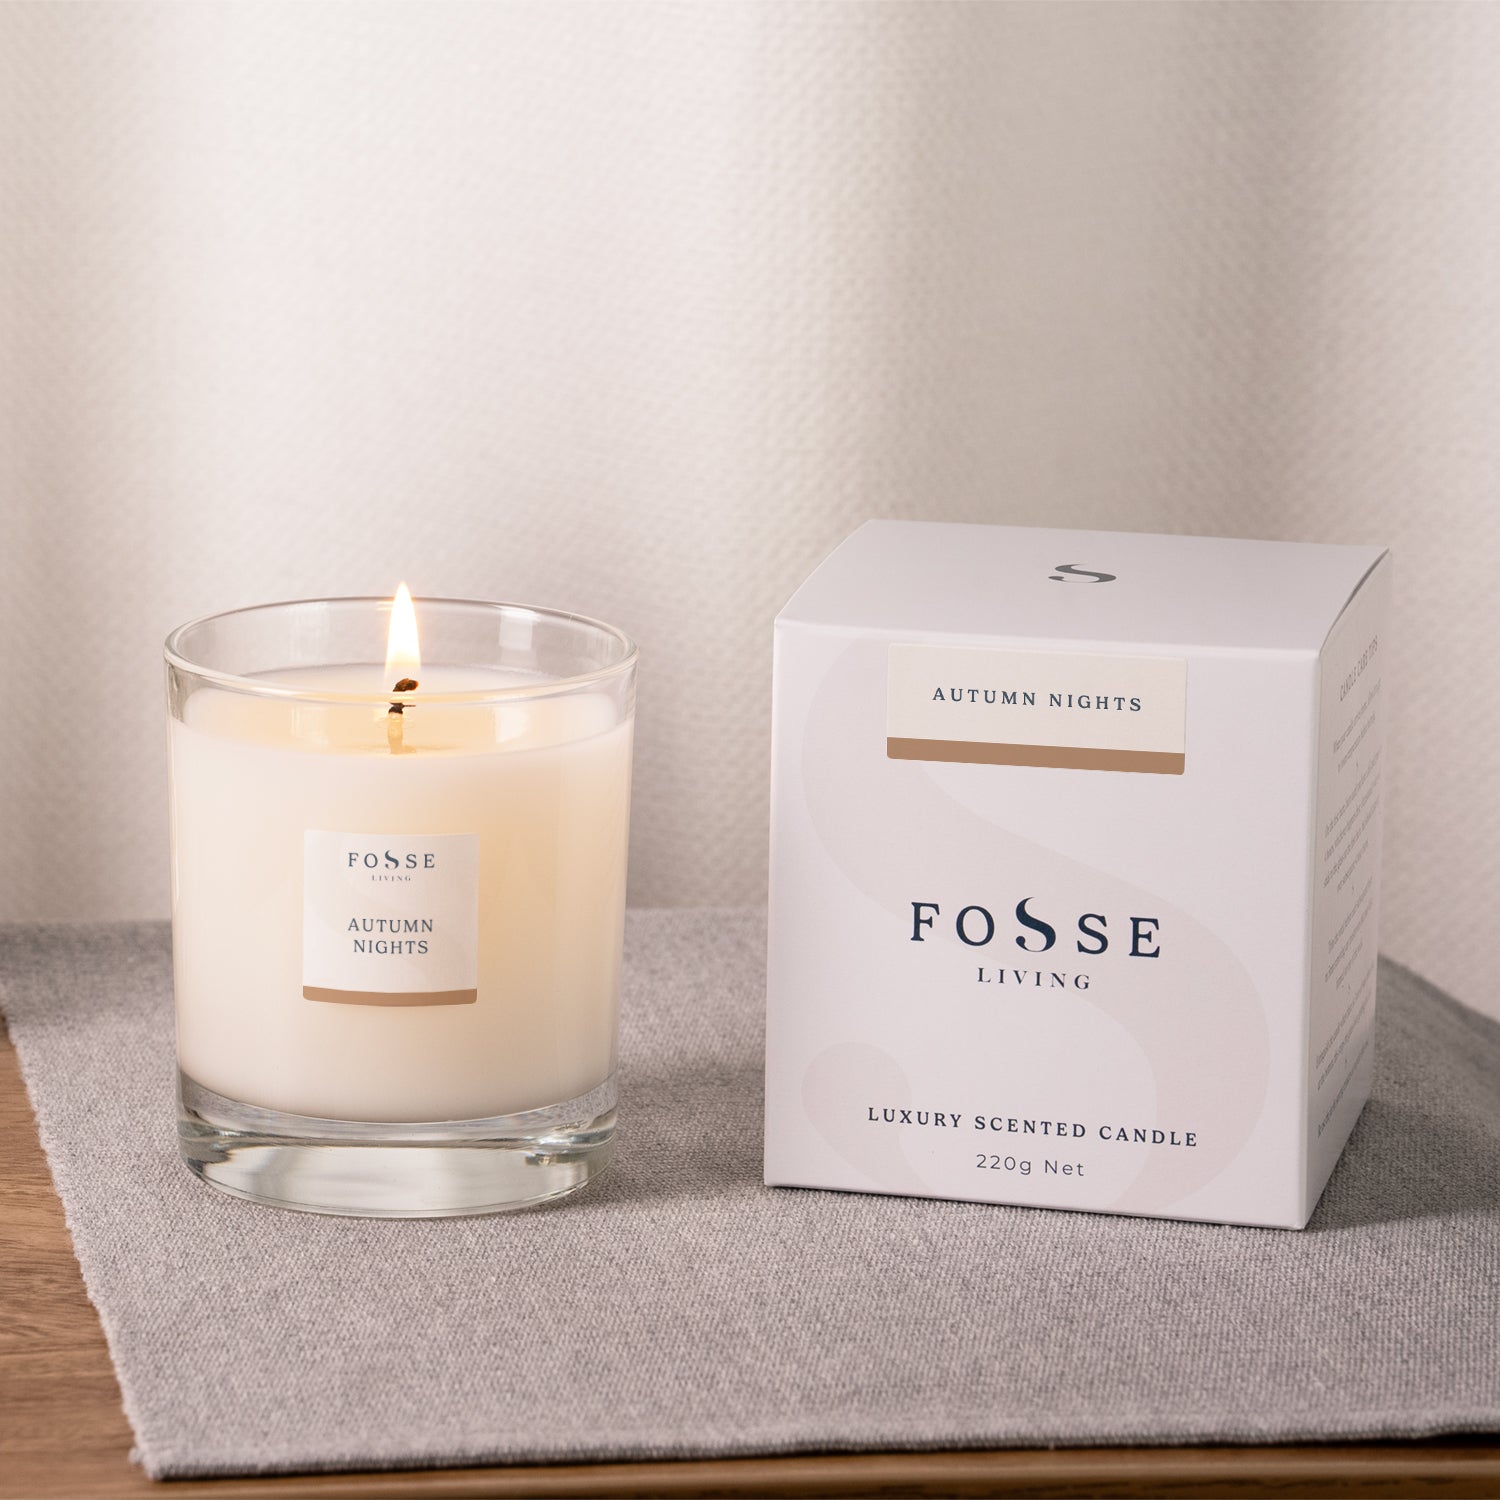 Autumn nights autumn scented candle by fosse living, spicy and cosy scent